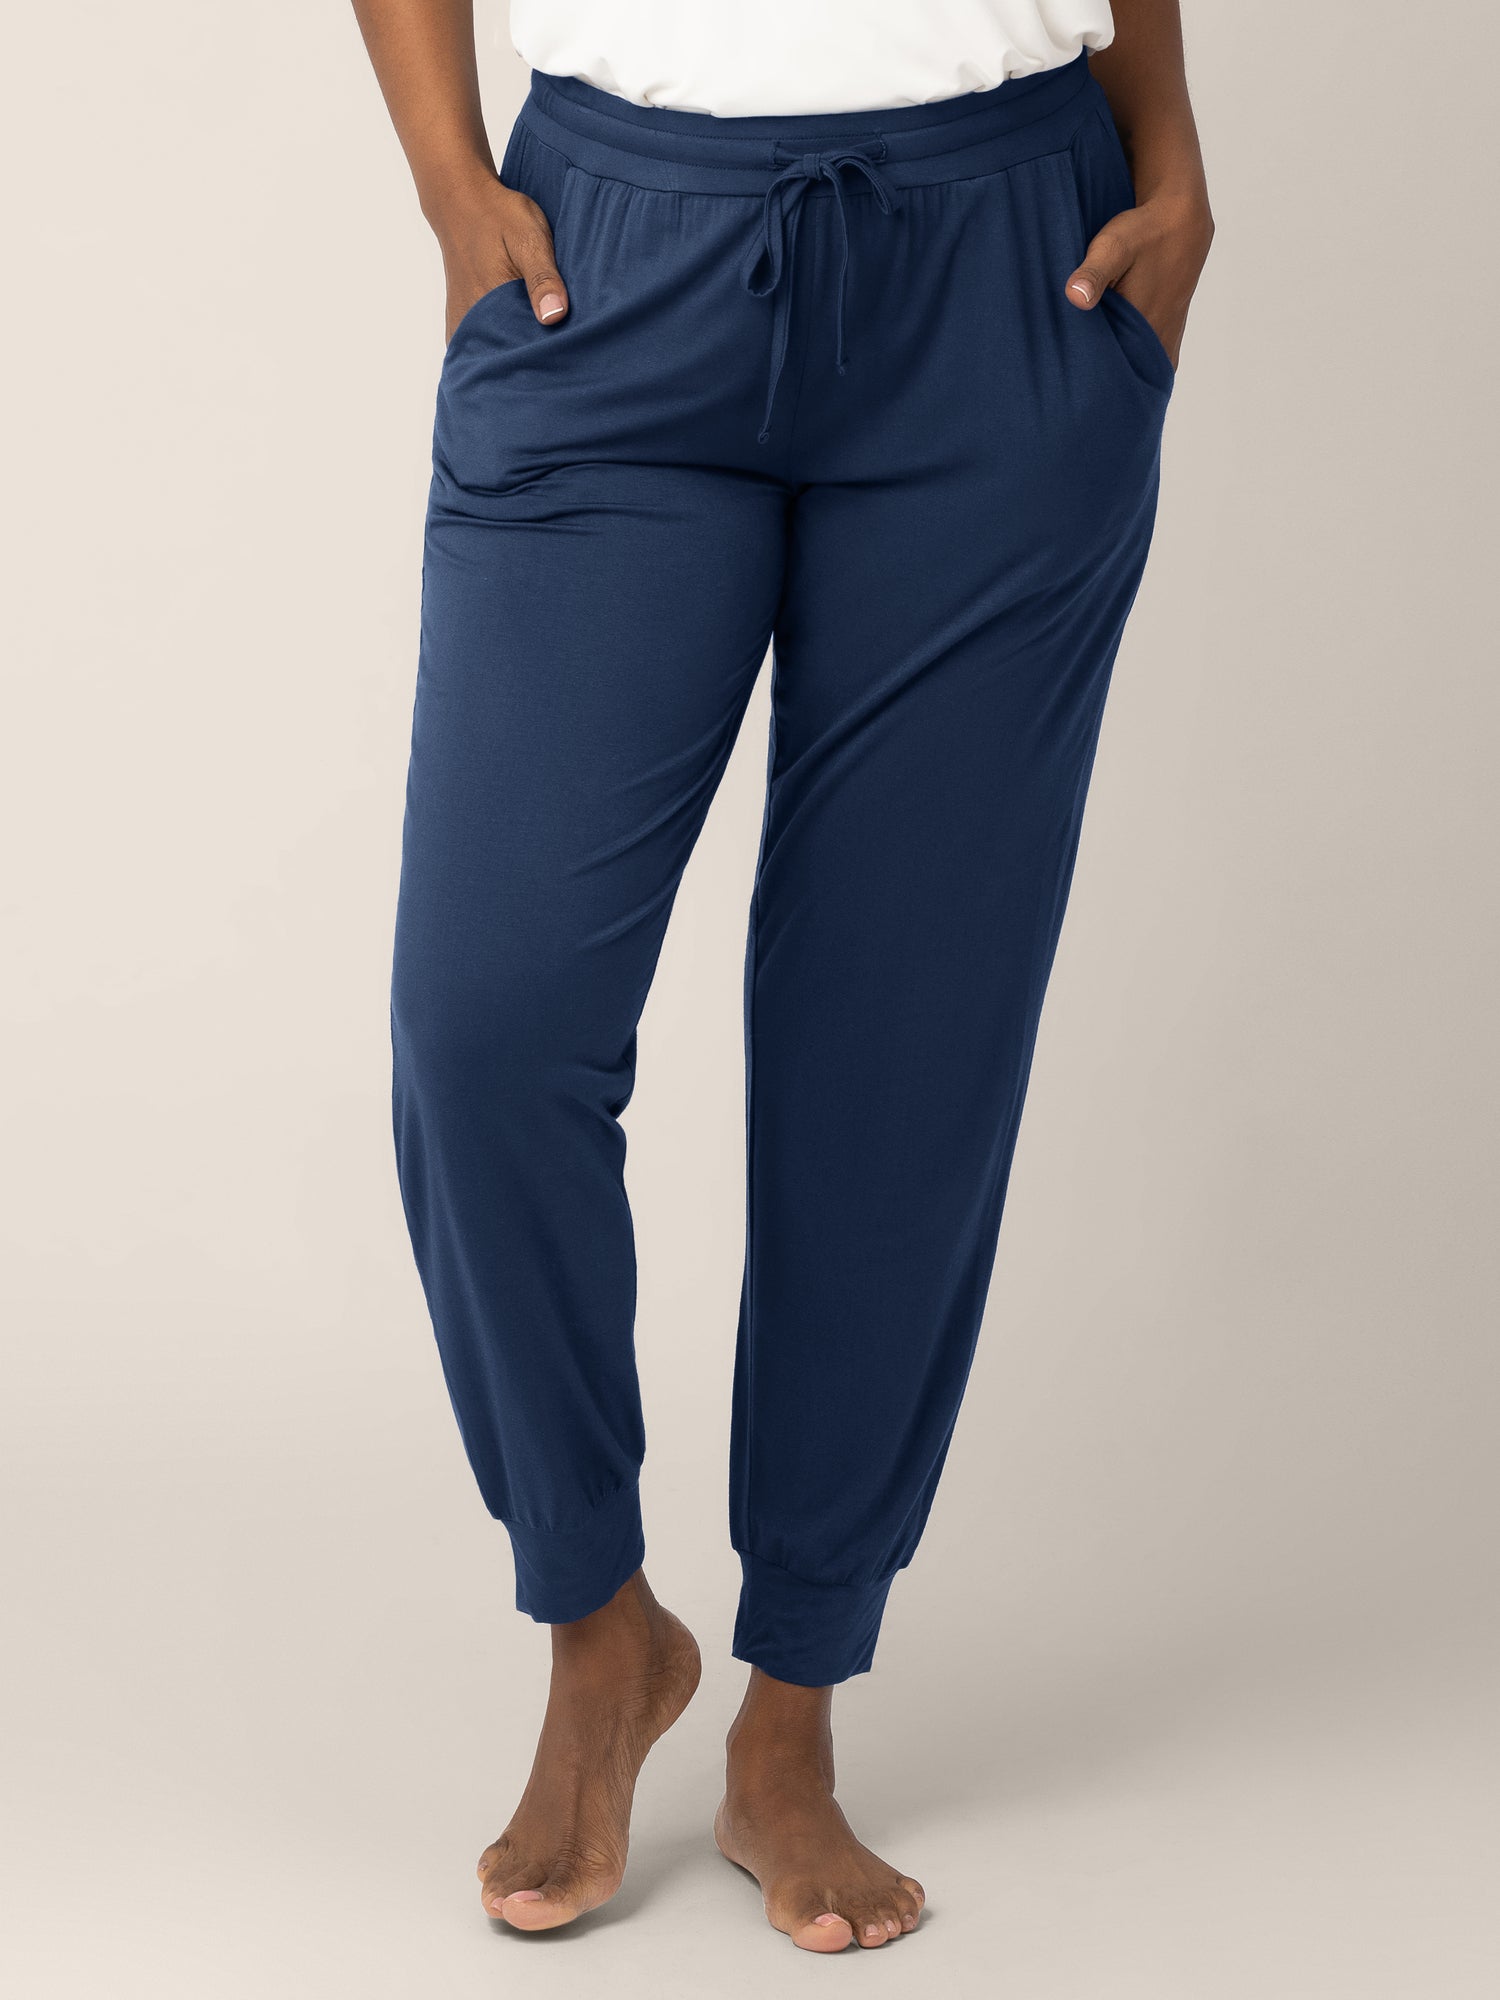 Bottom half of a model wearing the Everyday Lounge Jogger in Navy @model_info:Rashé is 5'6" and wearing a Small Regular.